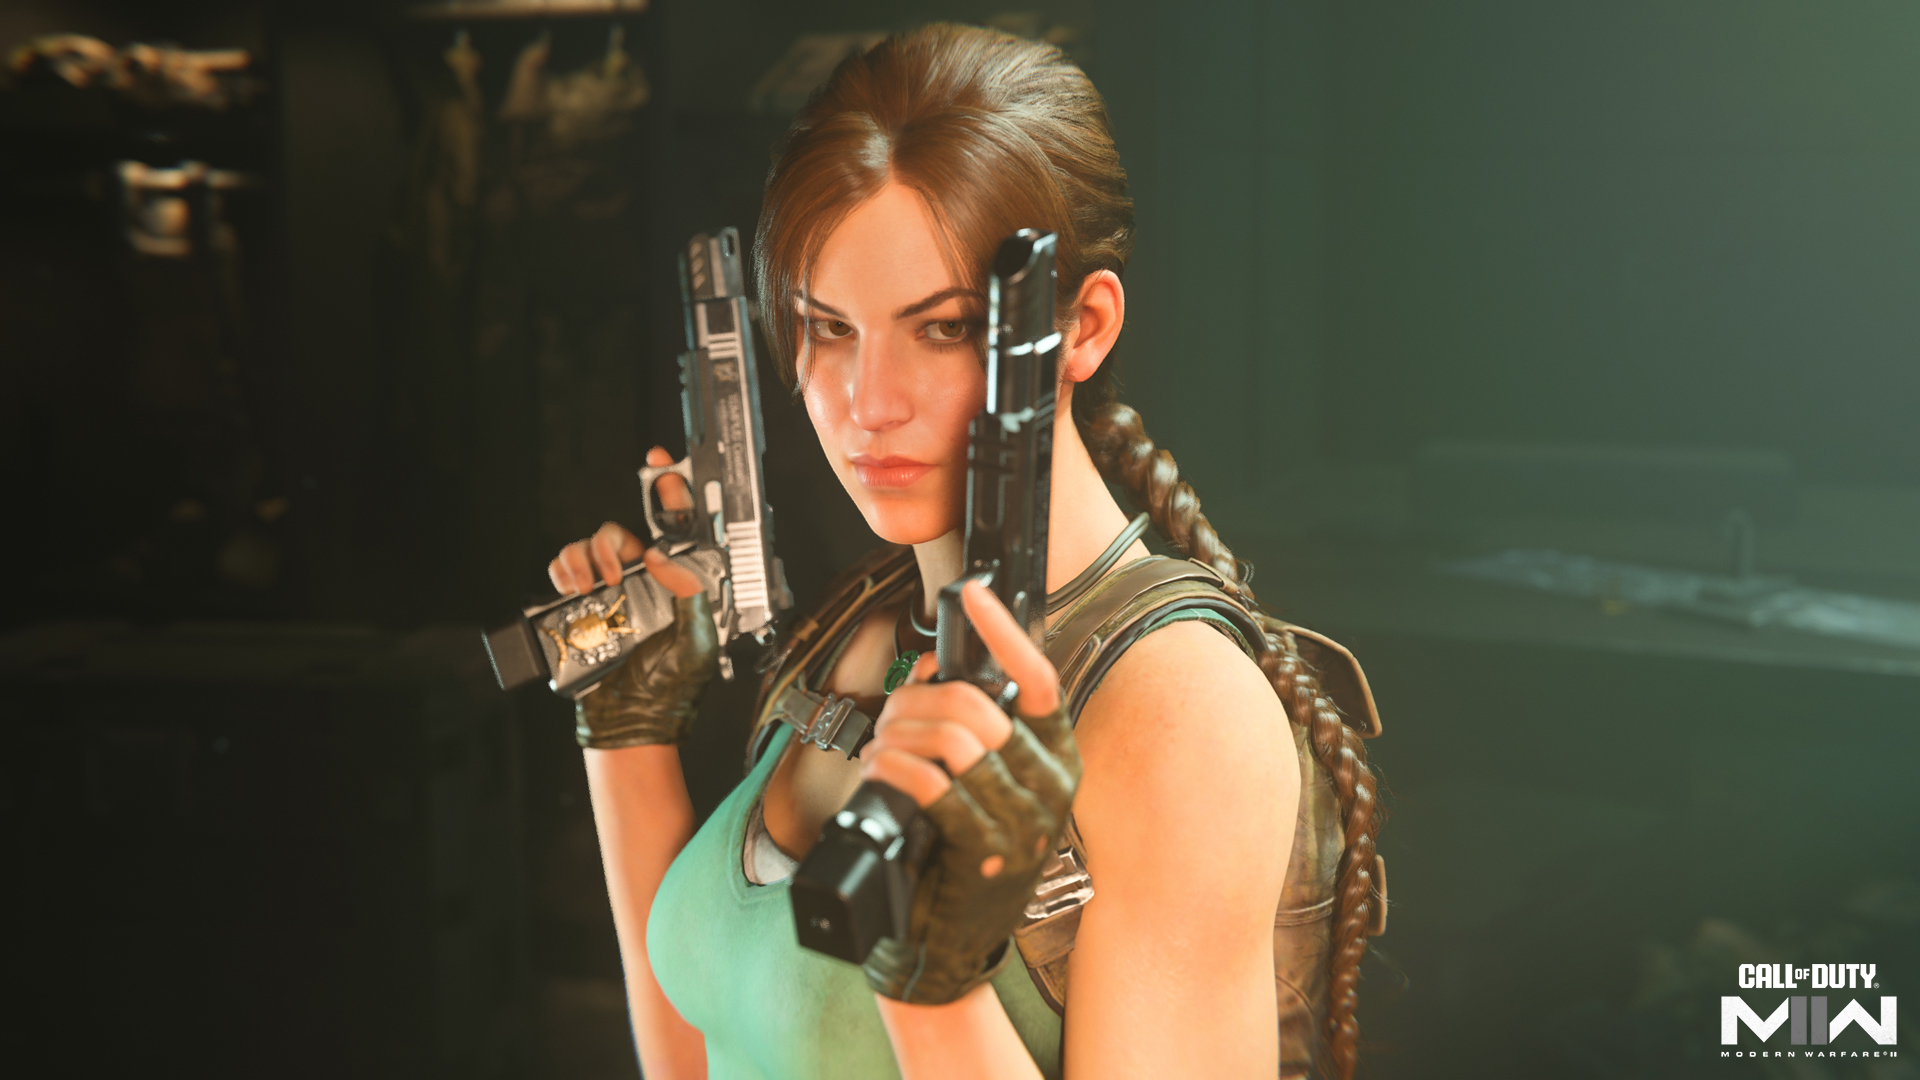 Lara Croft's Tomb Raider Pack Revealed in Call of Duty Insider Gaming